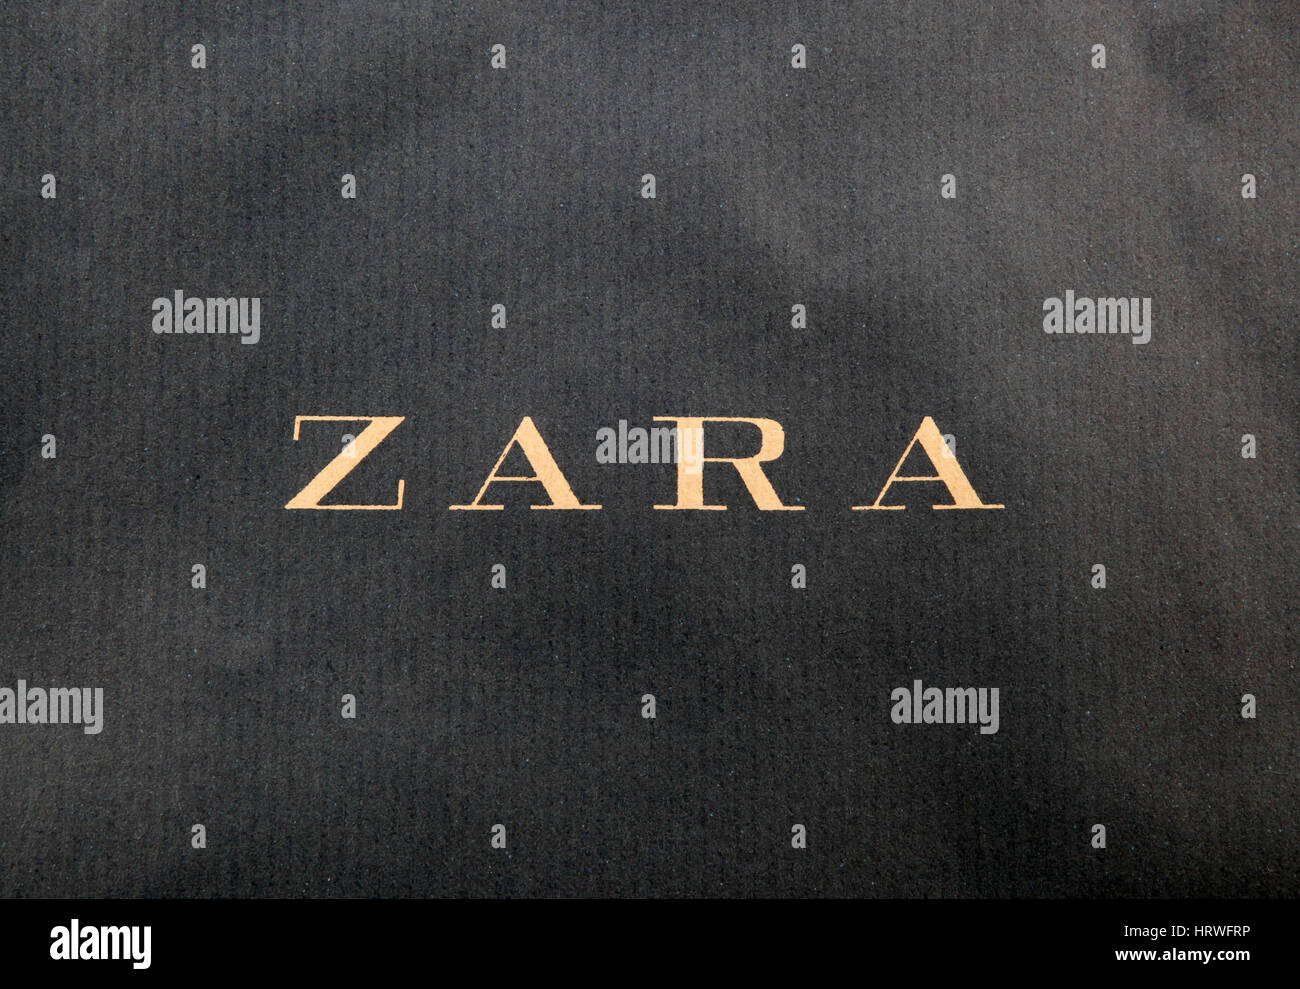 Arteixo Zara High Resolution Stock Photography and Images - Alamy